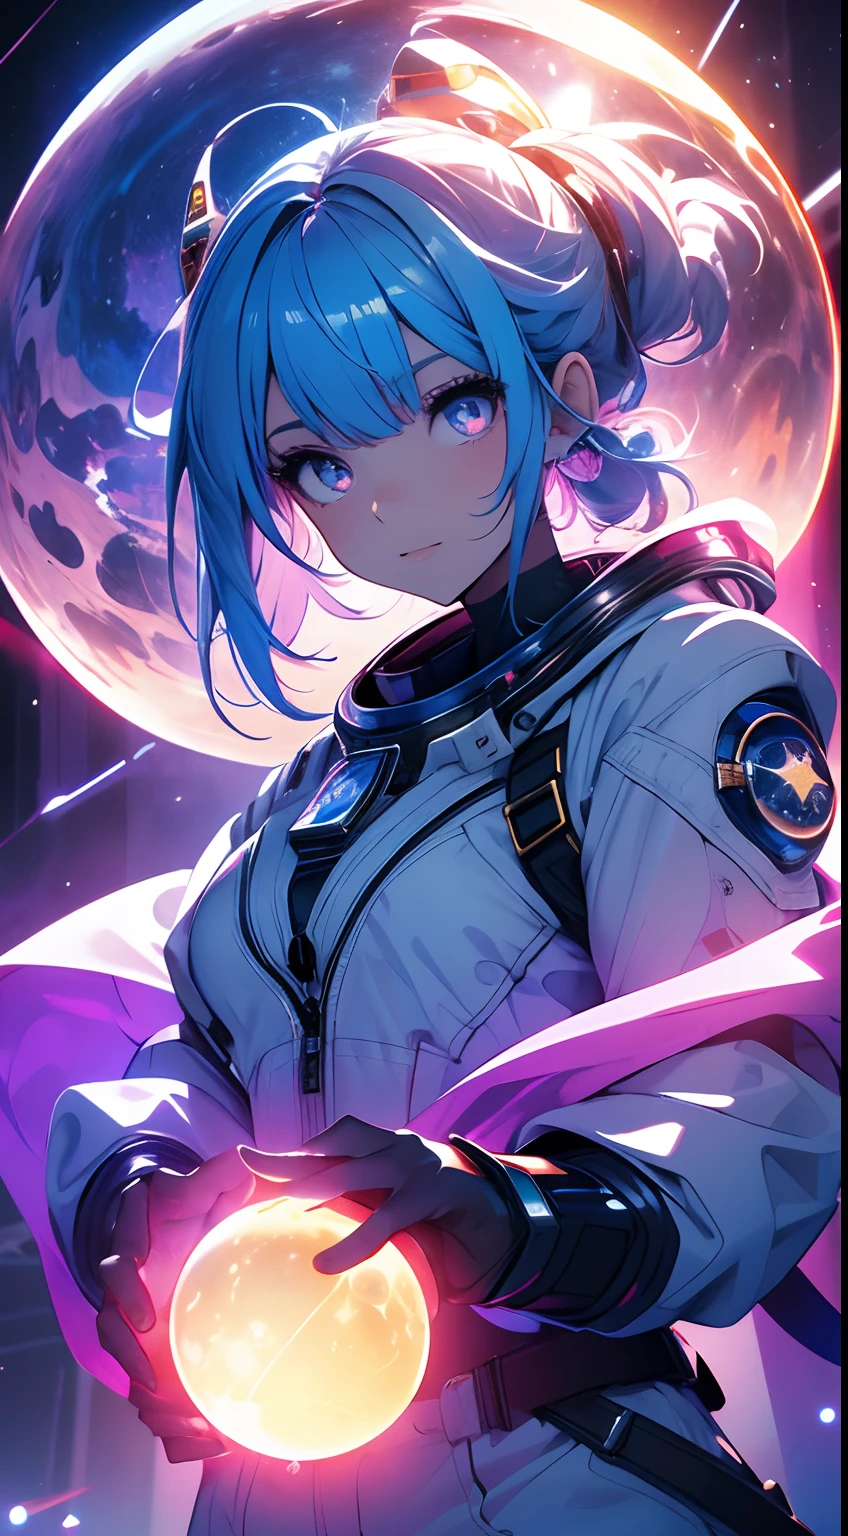 (masterpiece), best quality, a cute girl floating in the space holding a planet, ((holding)), sphere, ((glow, planet glow)), perfect face, expressive eyes, space suit, austronaut helmet, spiral galaxy, astronomy wallpaper, happy, colorful, exciting, gorgeous, blue giant star, cowboy shot, cosmic, cosmos  4k, shiny,  perfect light, glowing sphere

BREAK is a cute girl on space, she is holding a glwoing sphere with the two hands, she is wearing a white space suit, she has blue hair, red eyes, red giant star,  sun like star, shine, BREAK vivid colors, bright,shiny, cool colors, dramatic lighting, artistic, creative, digital art, wallpaper, (glowing eyes), magical, impossible, good vibes, good emotions, adventure, (solo, alone,1girl)